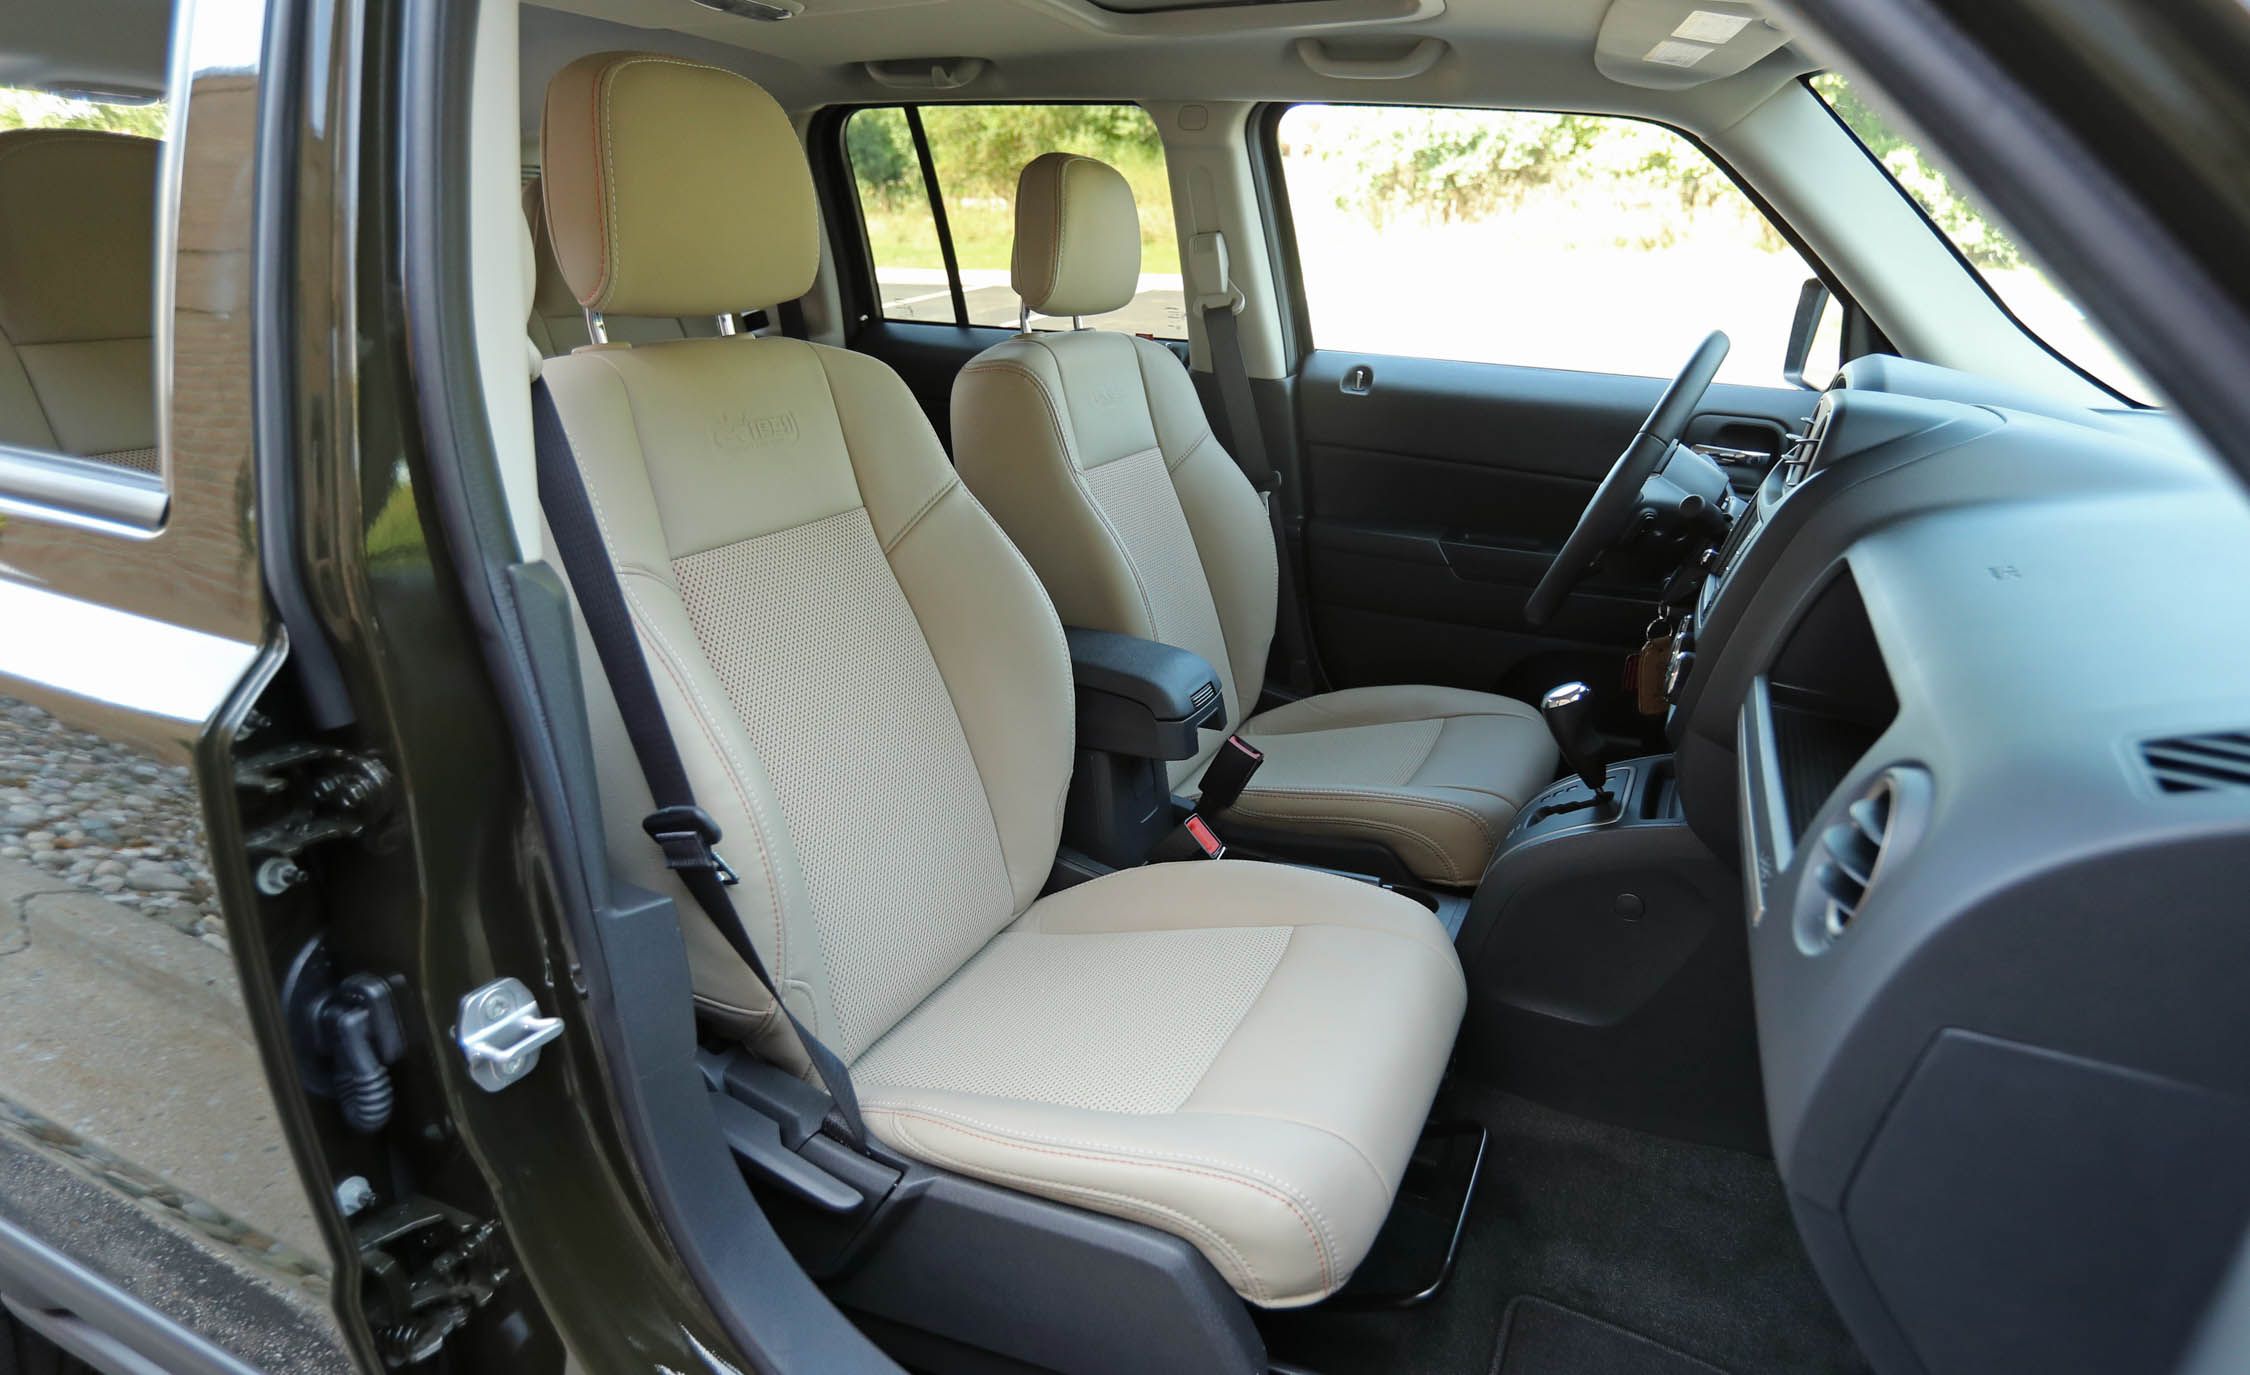 2016 Jeep Patriot Interior Seats Front (View 15 of 27)